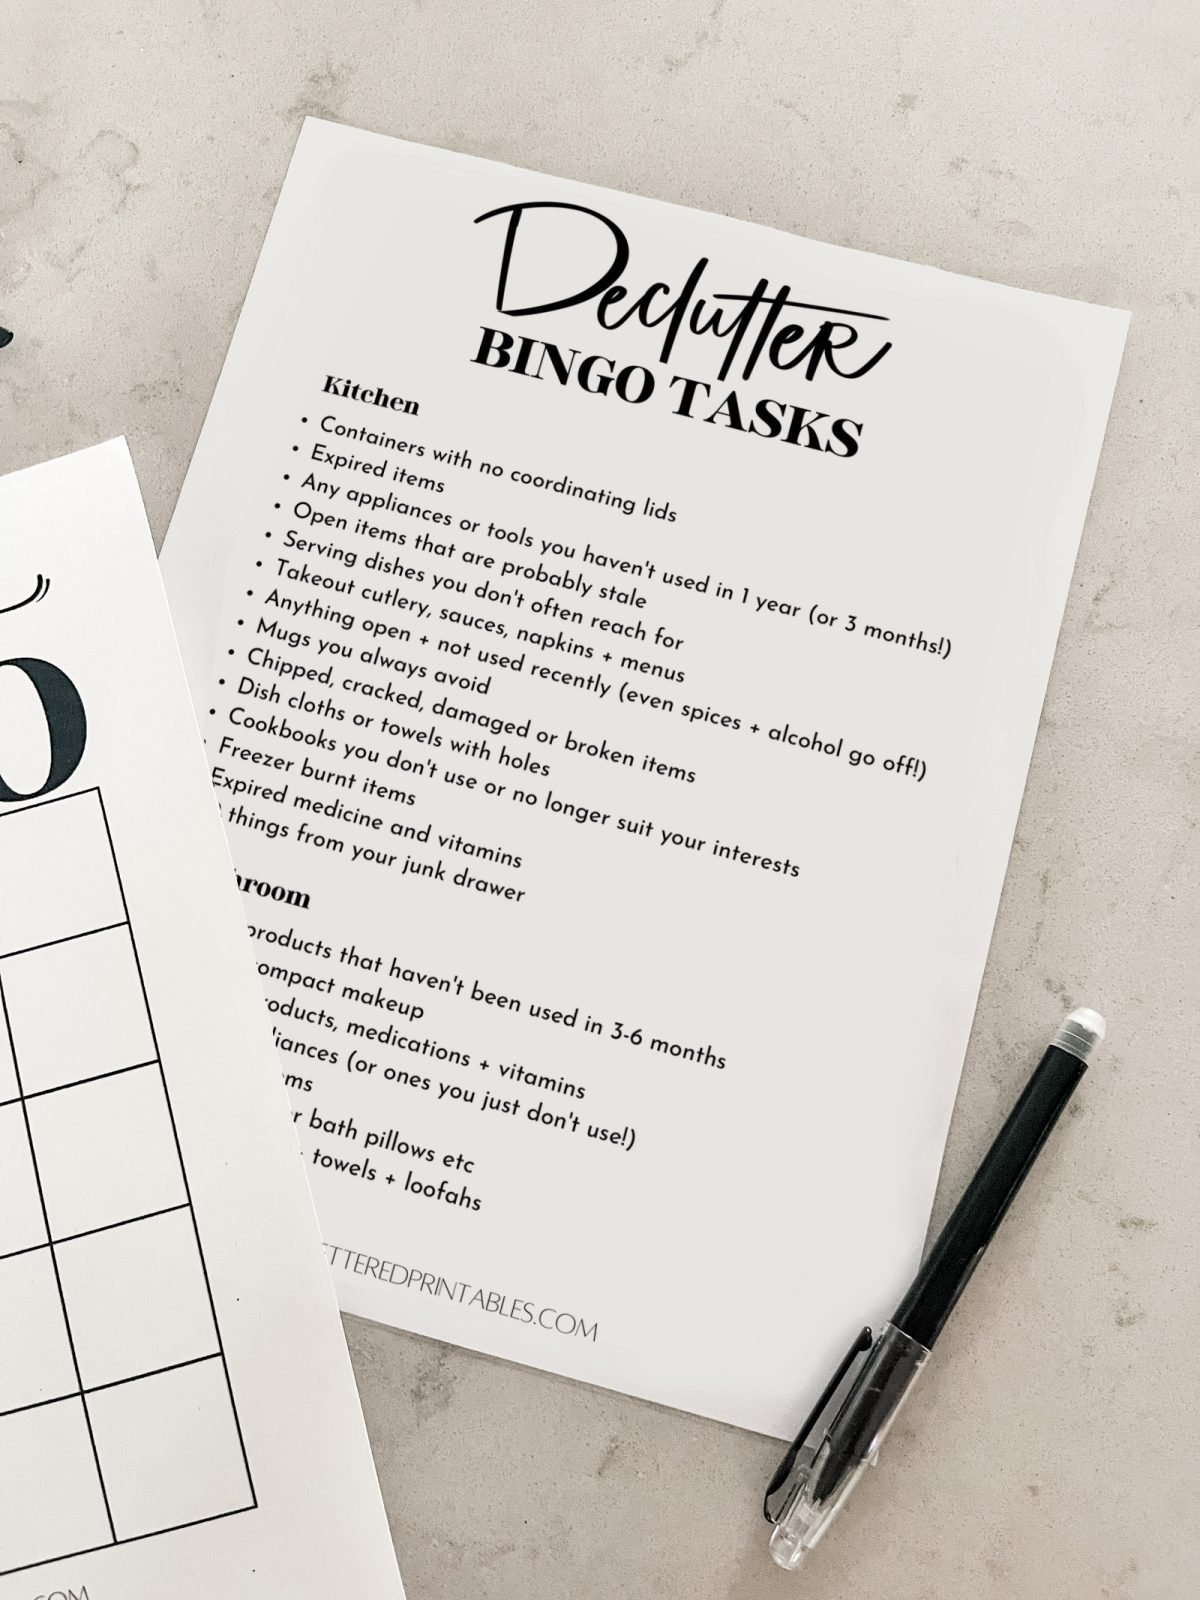 Minimalist declutter checklist printed on counter with pen